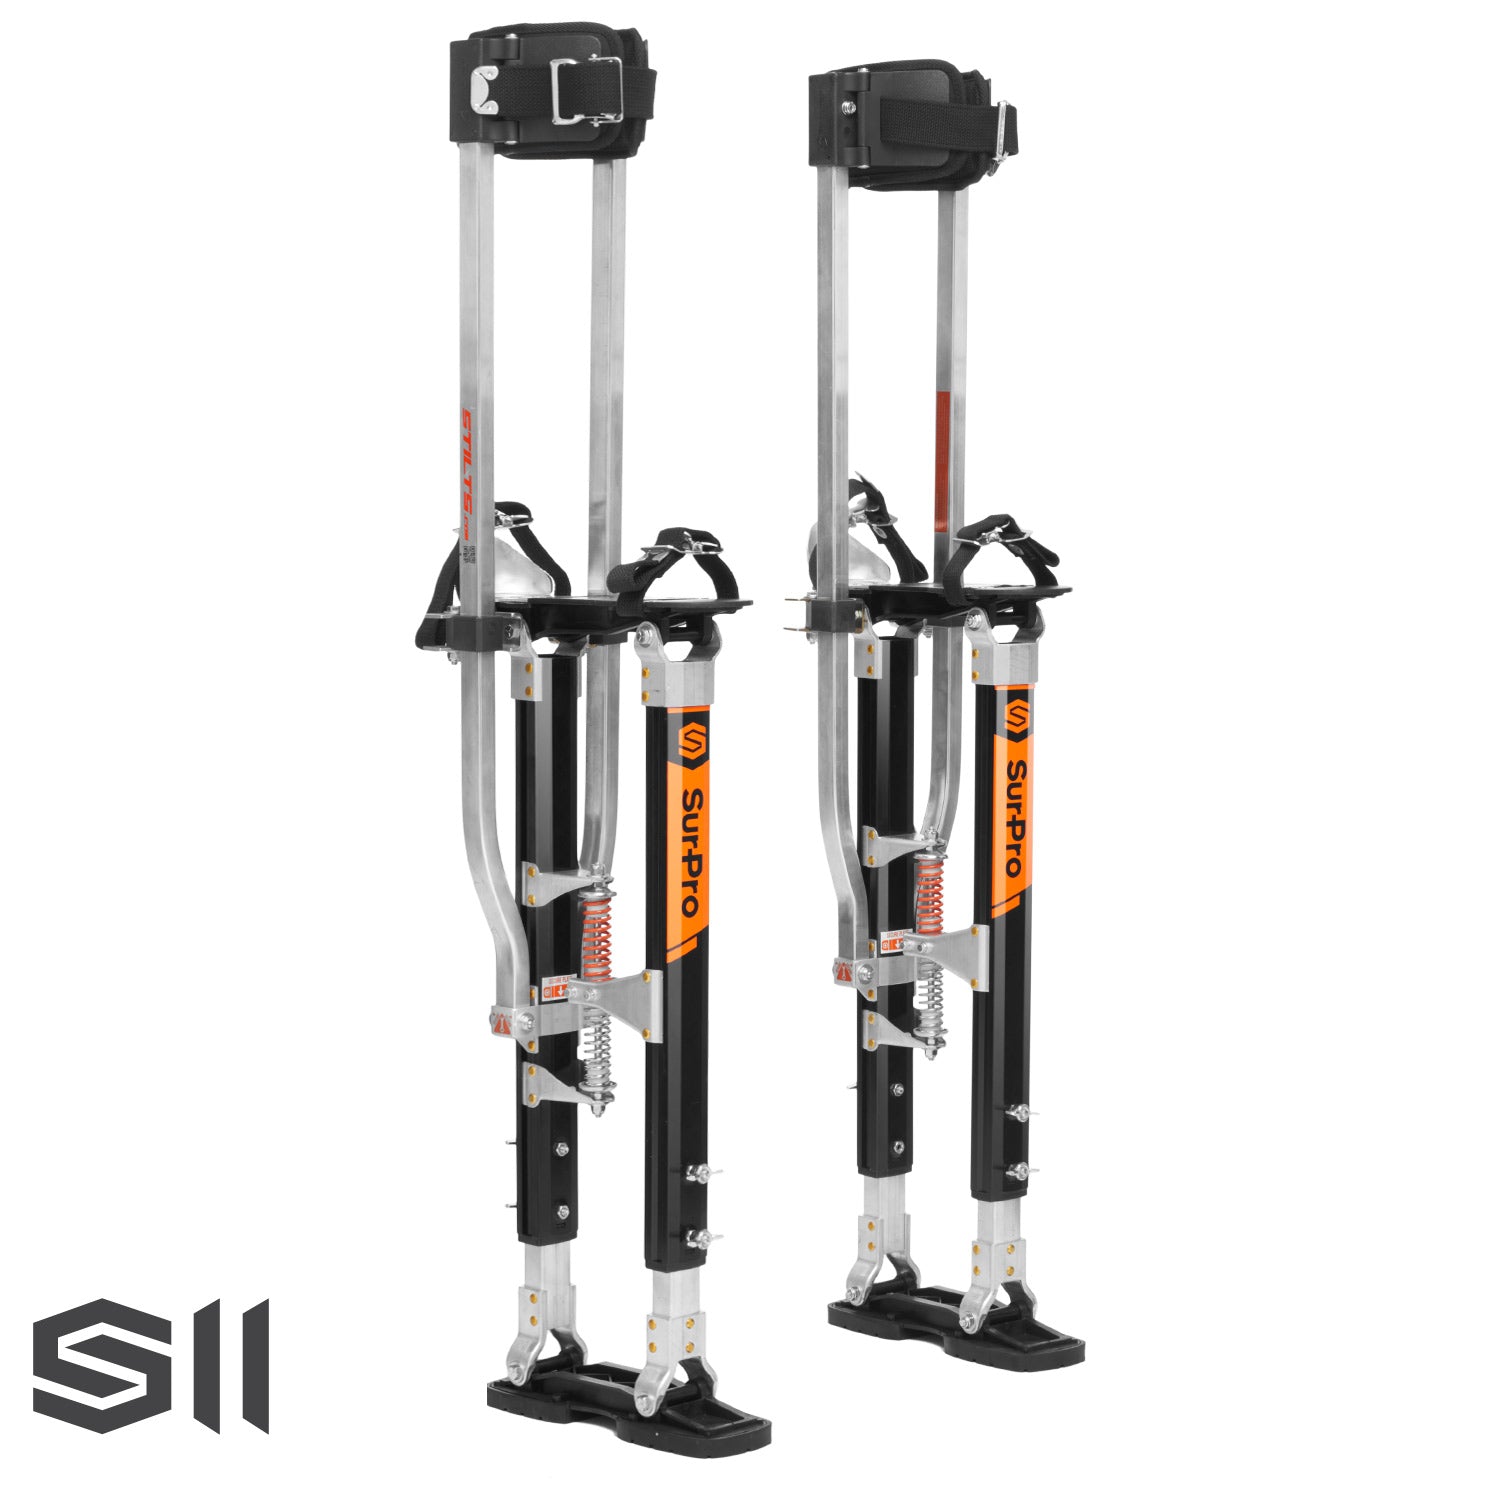 S2 Magnesium Stilts replace the old S2 Mag drywall stilts